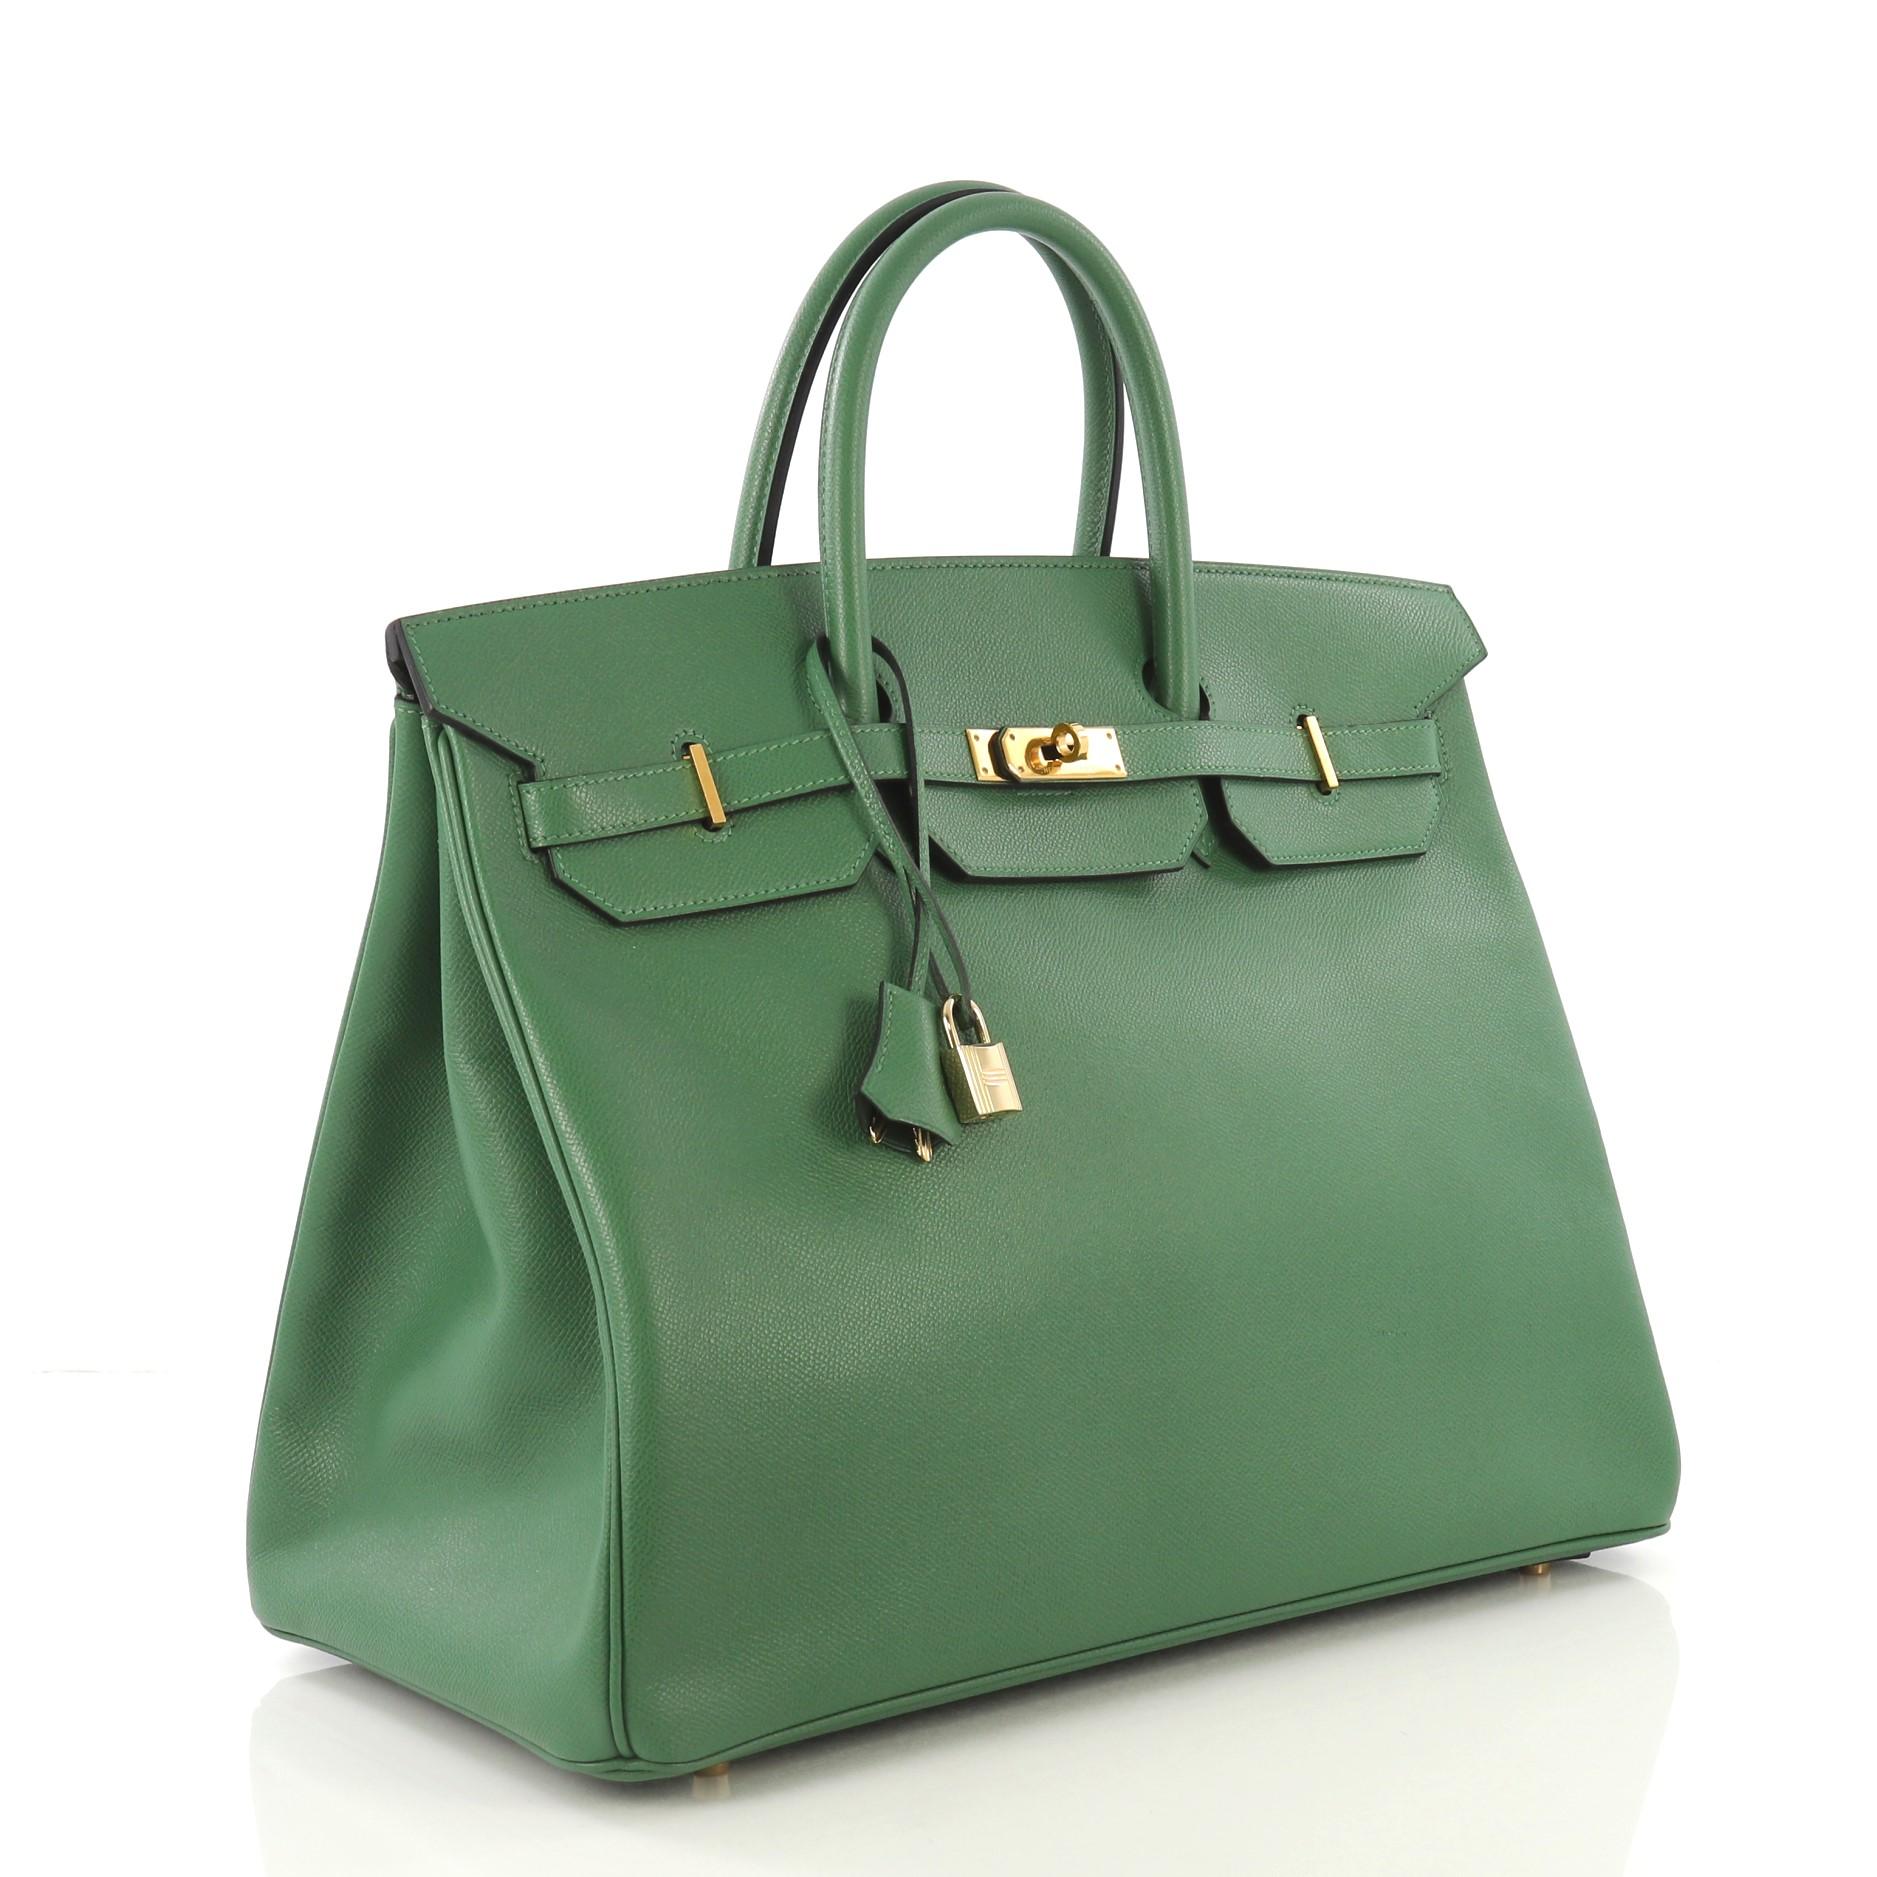 This Hermes Birkin Handbag Vert Bengale Courchevel with Gold Hardware 40, crafted in Vert Bengale green Courchevel leather, features dual rolled handles, frontal flap, and gold hardware. Its turn-lock closure opens to a Vert Bengale green Chevre